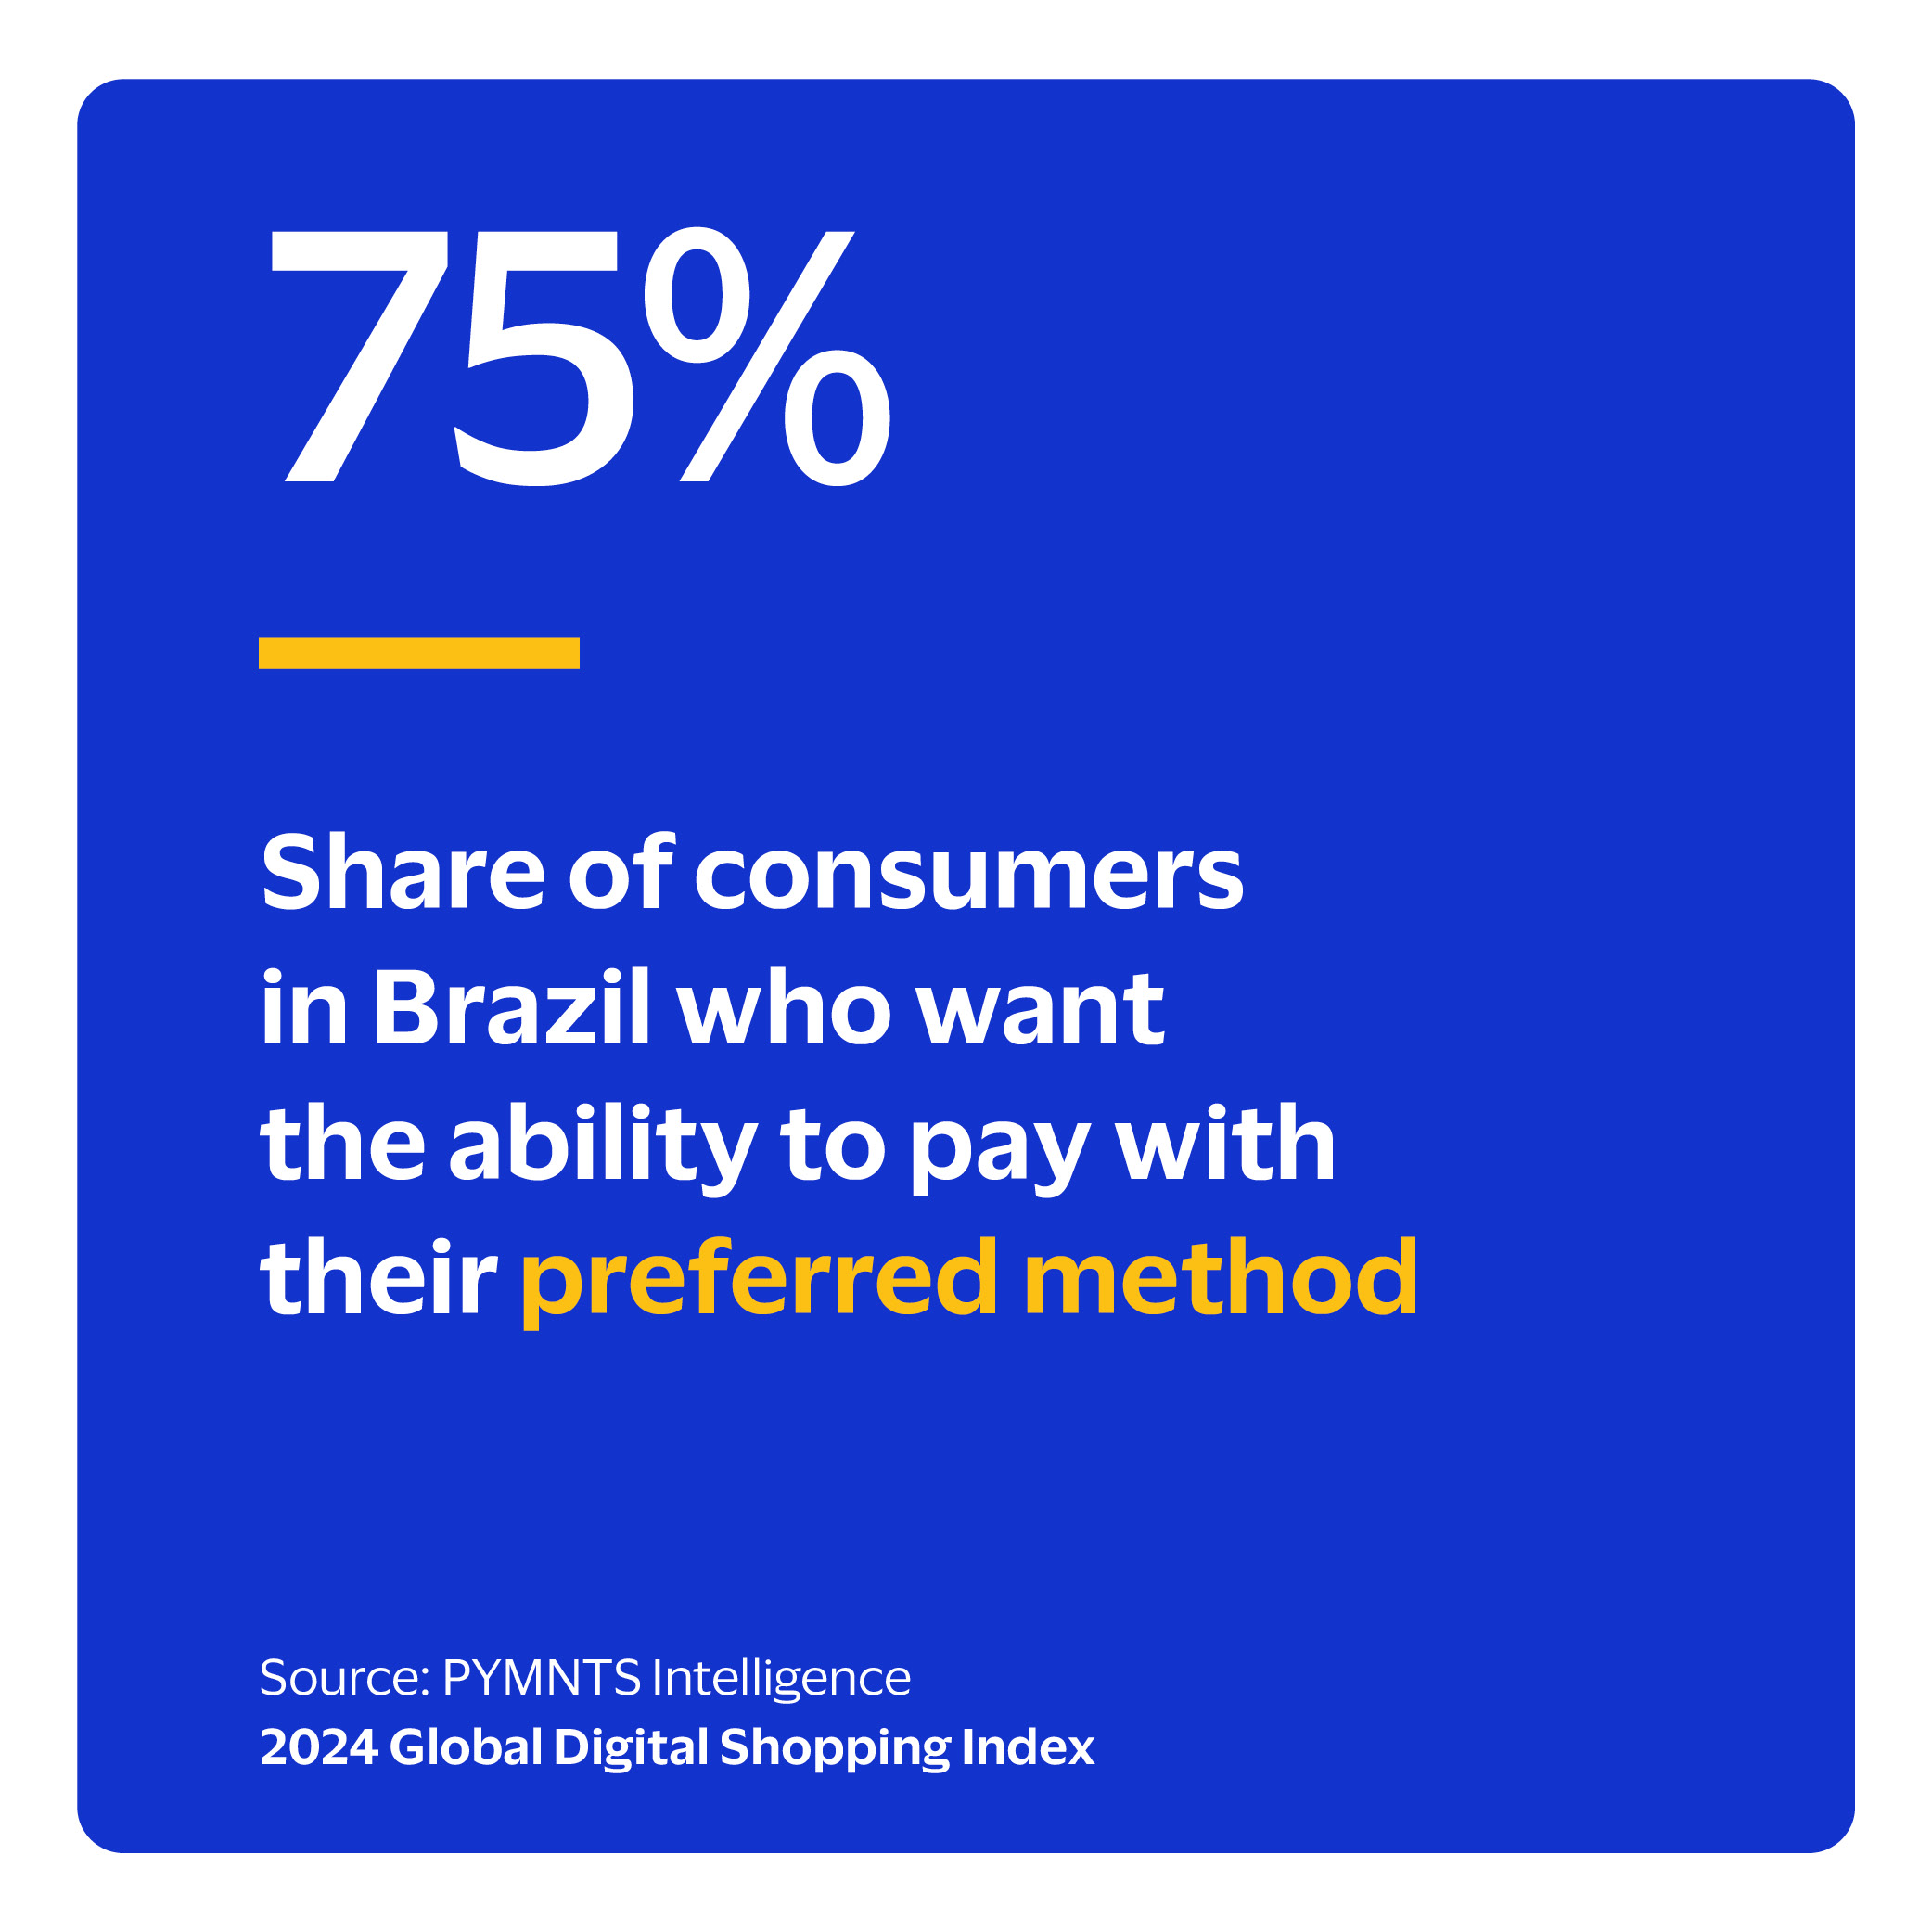 75%: Share of consumers in Brazil who want the ability to pay with their preferred method